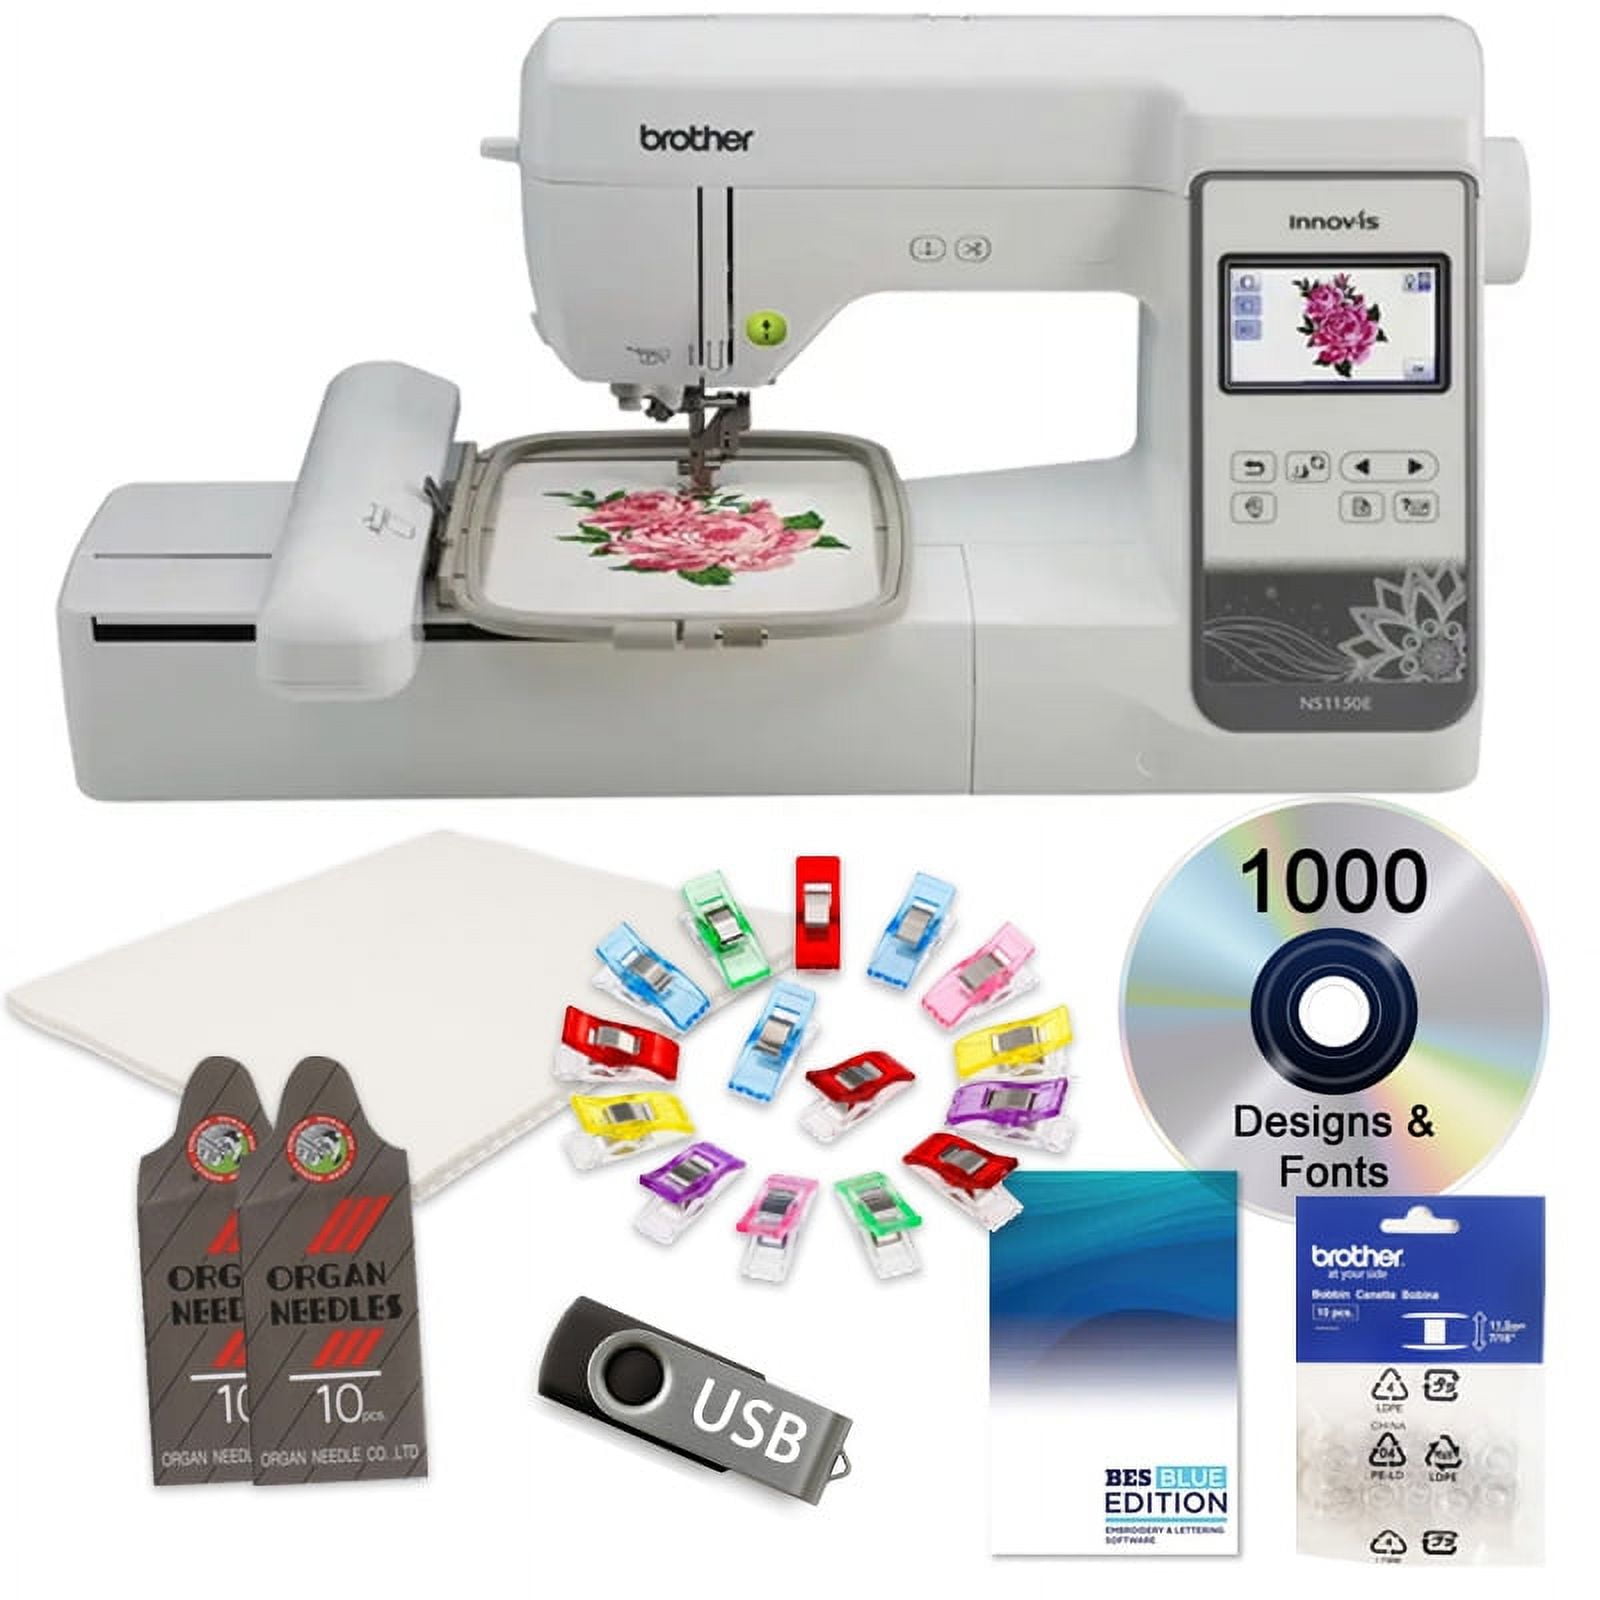 Brother NV1000 Sewing And Embroidery Machine